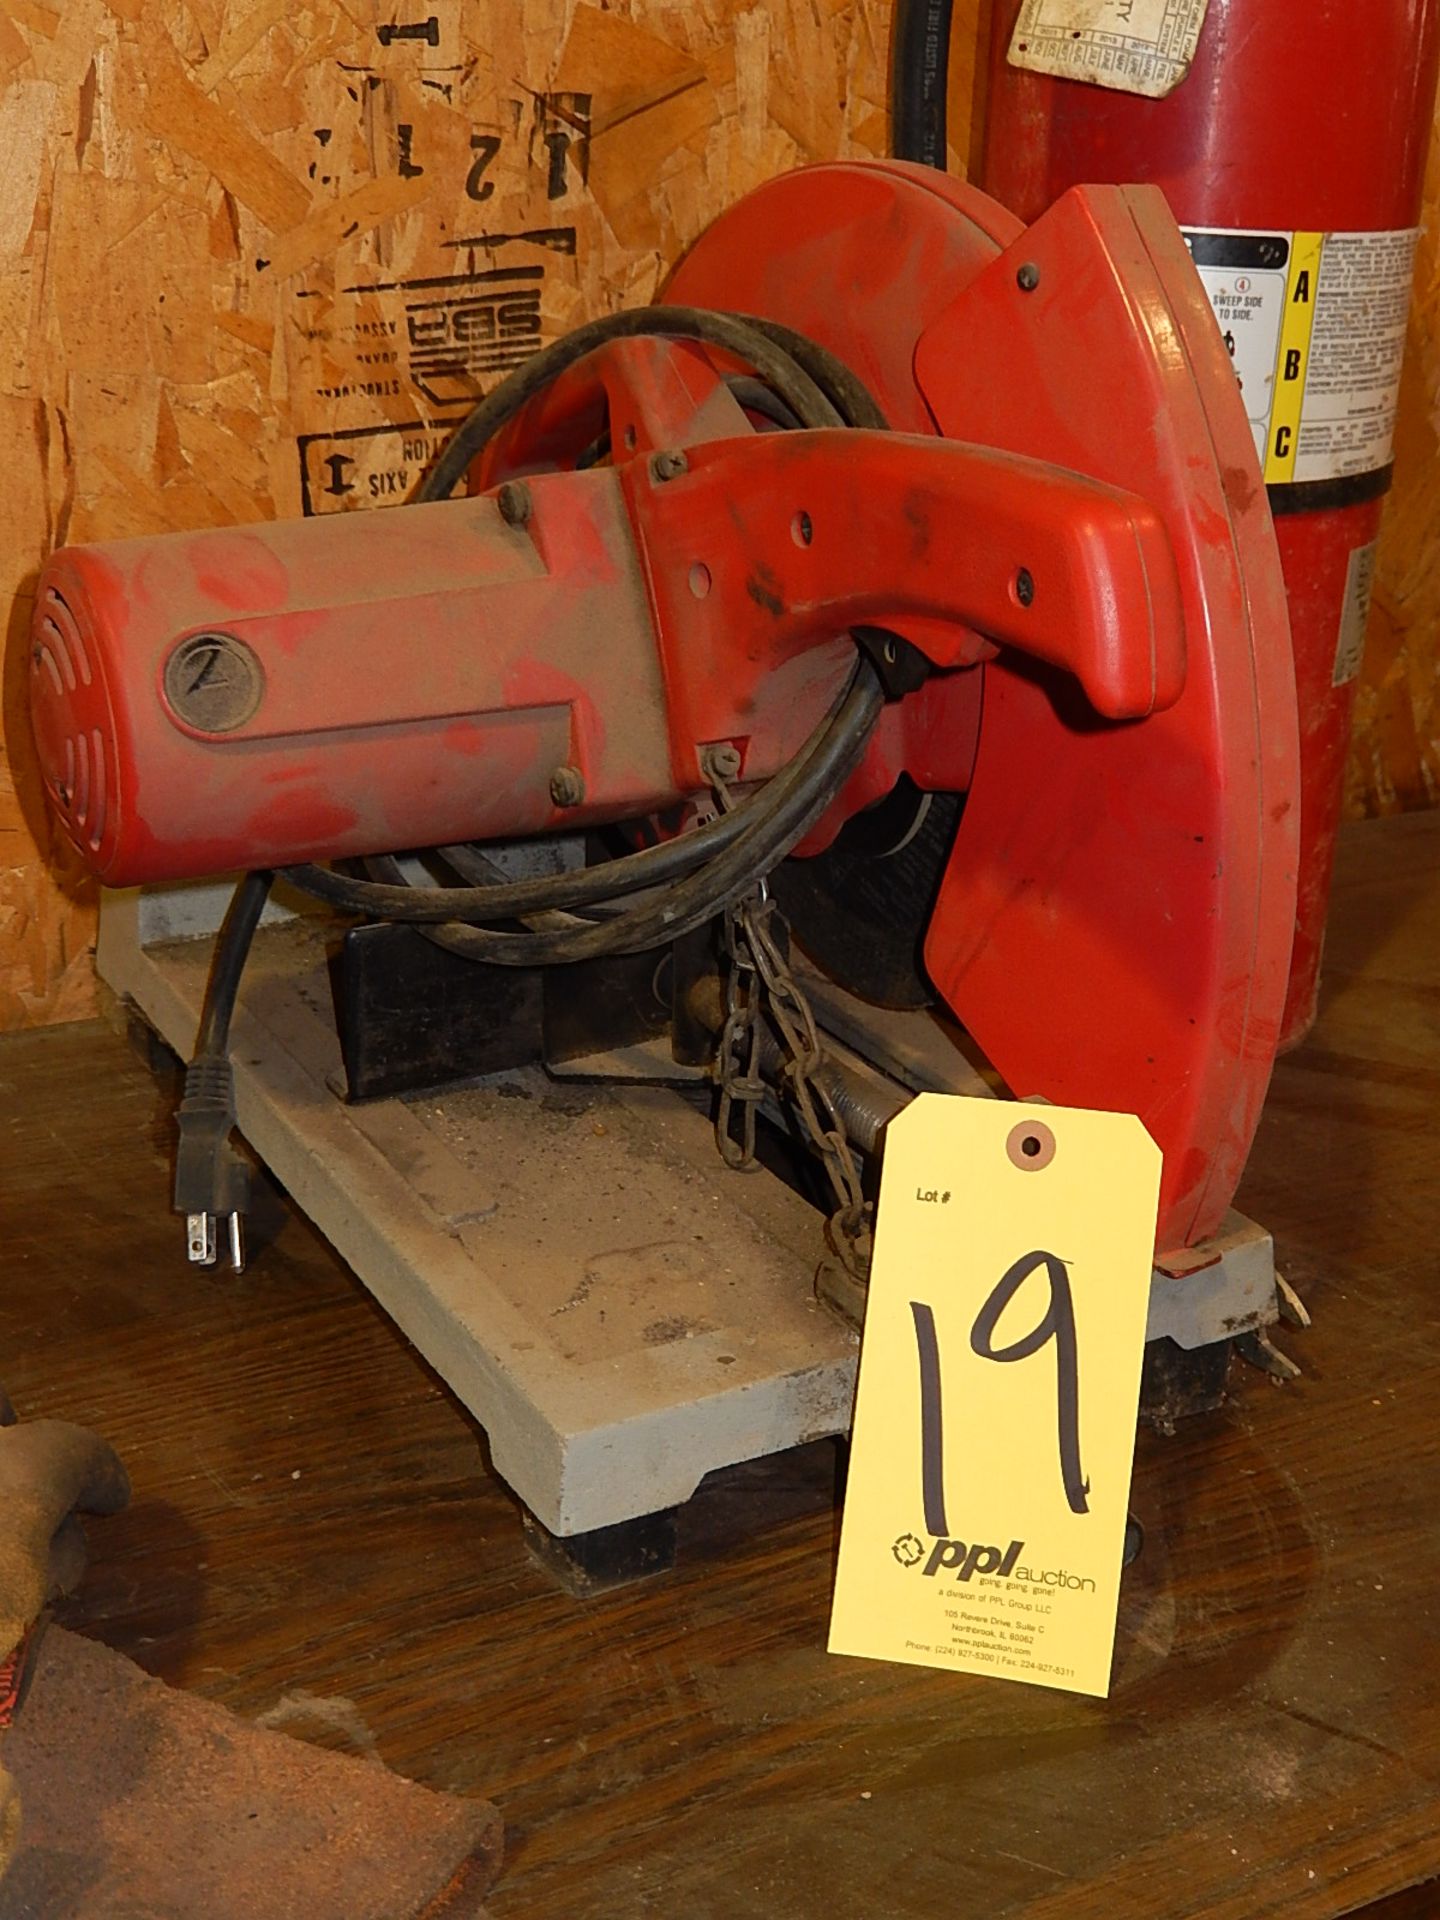 Milwaukee 14 in. Chop Saw Model 6177, with Vise, 15 Amp (Sioux Falls, SD)